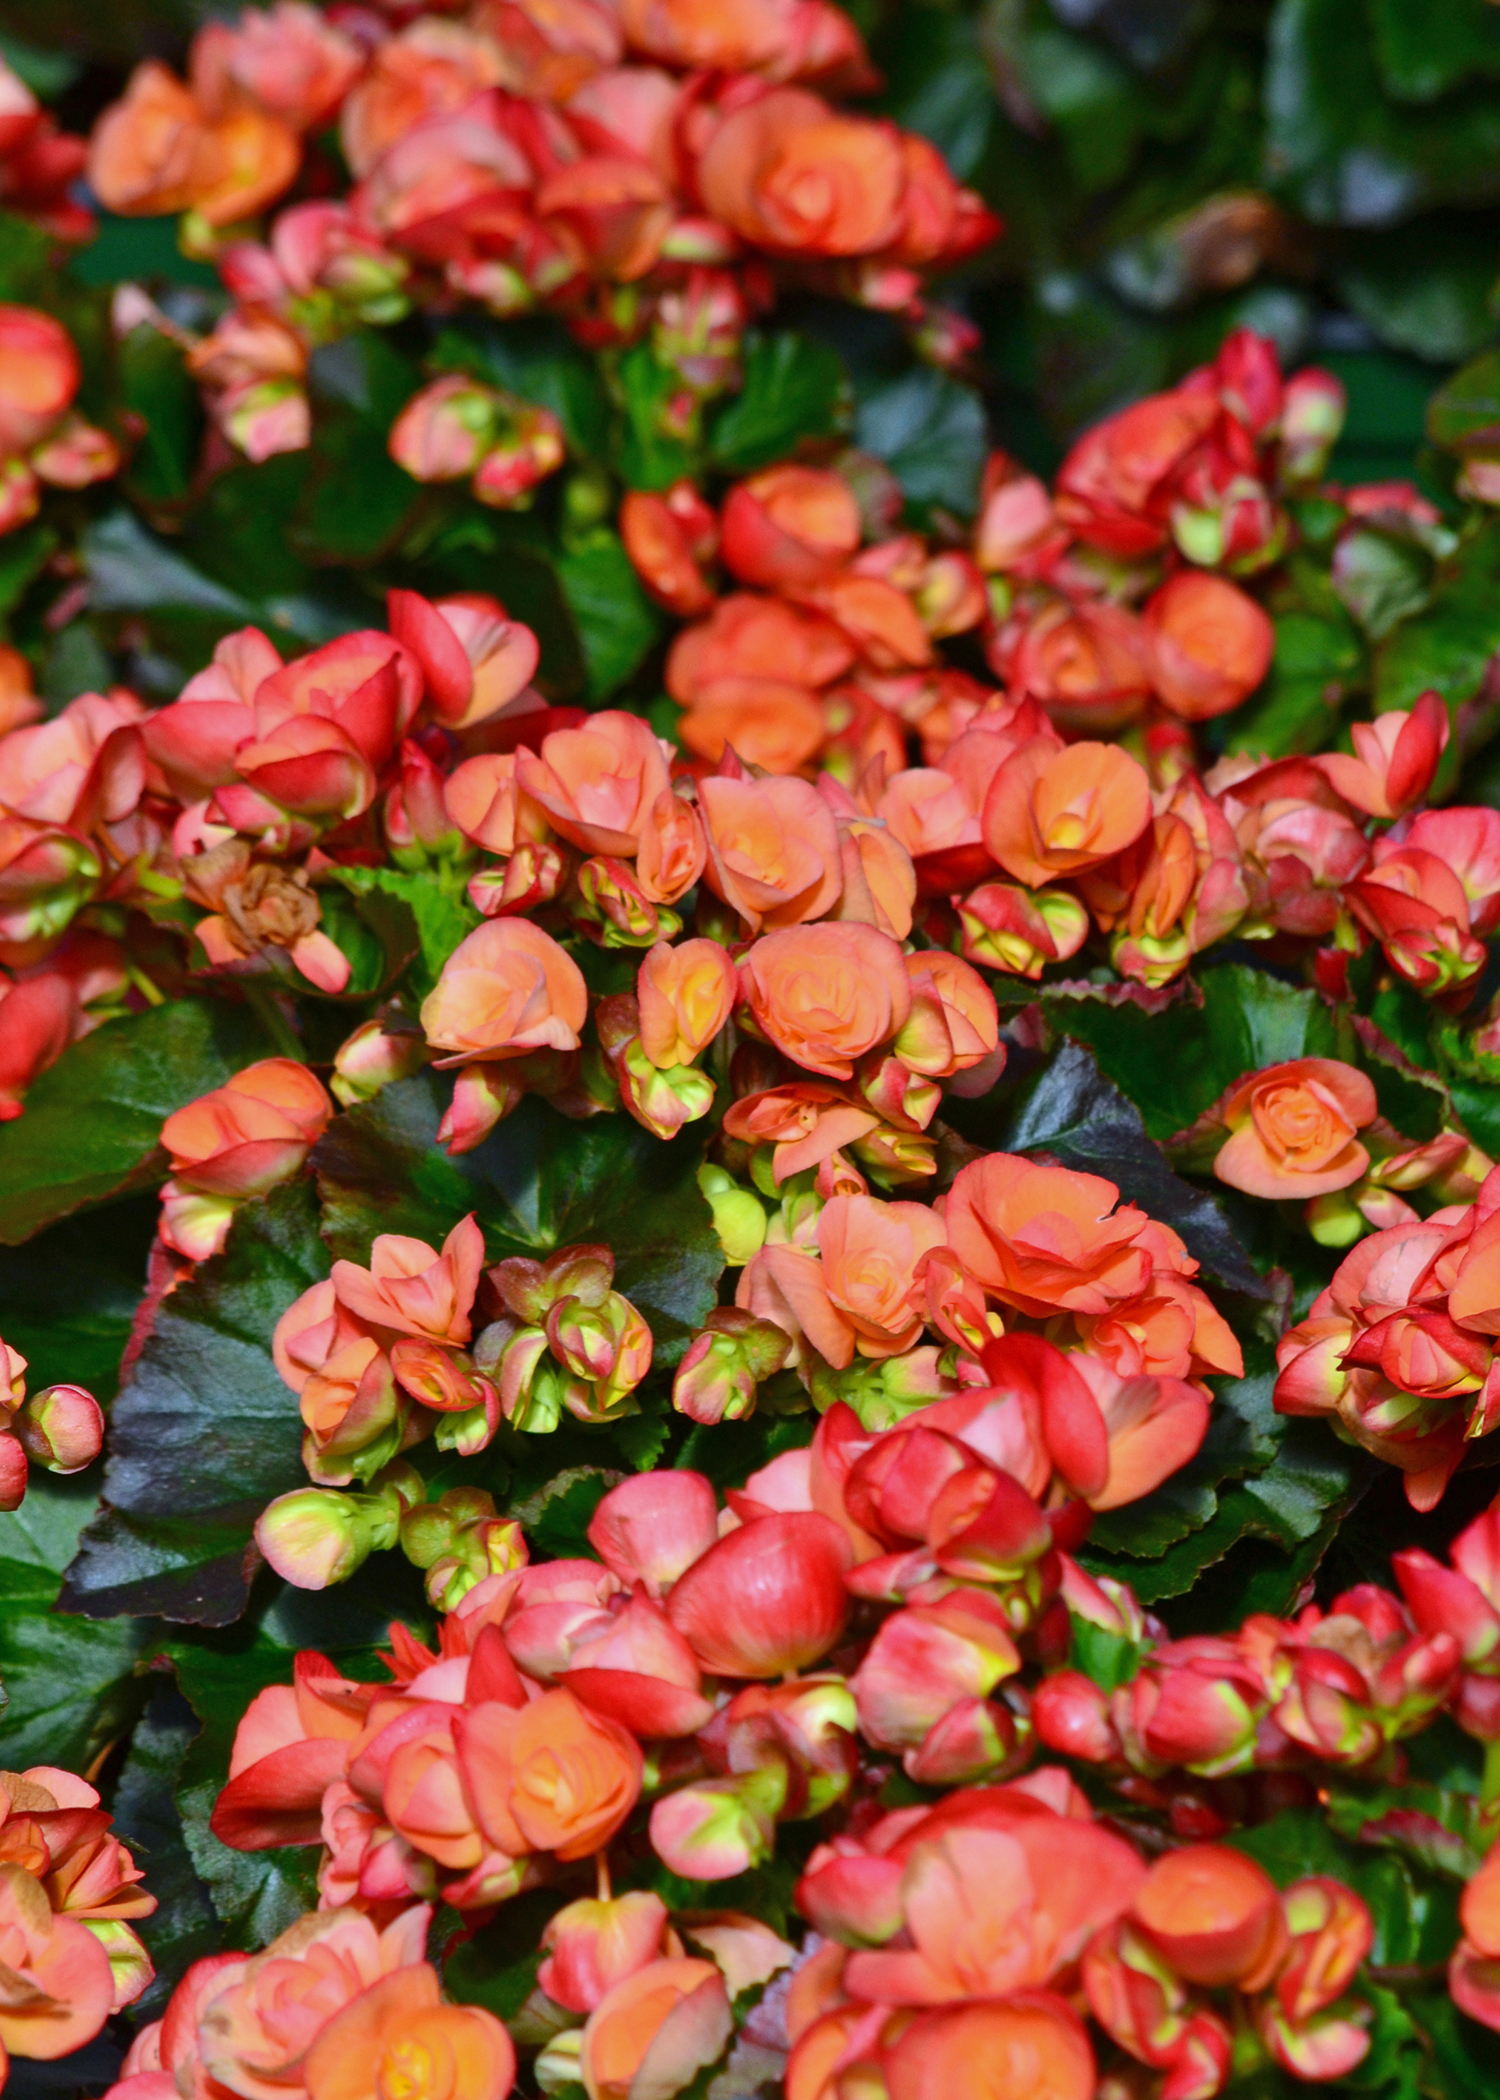 A plant has dozens of small, red blooms.